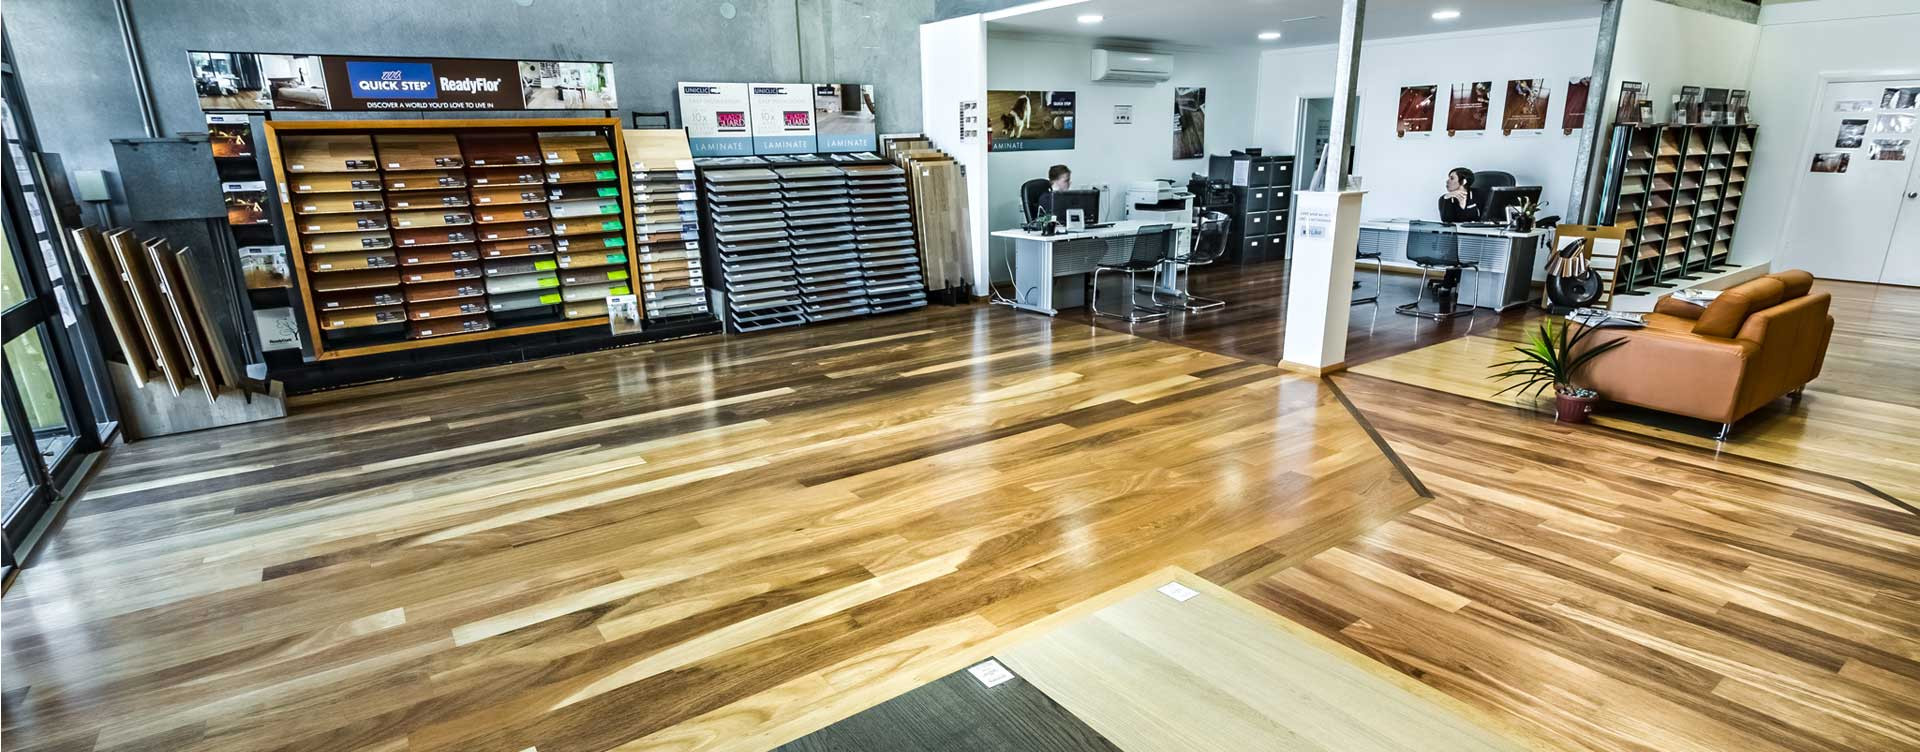 10 Amazing A Hardwood Floor Specialist 2023 free download a hardwood floor specialist of timber flooring perth coastal flooring wa quality wooden with regard to thats why they call us the home of fine wood floors